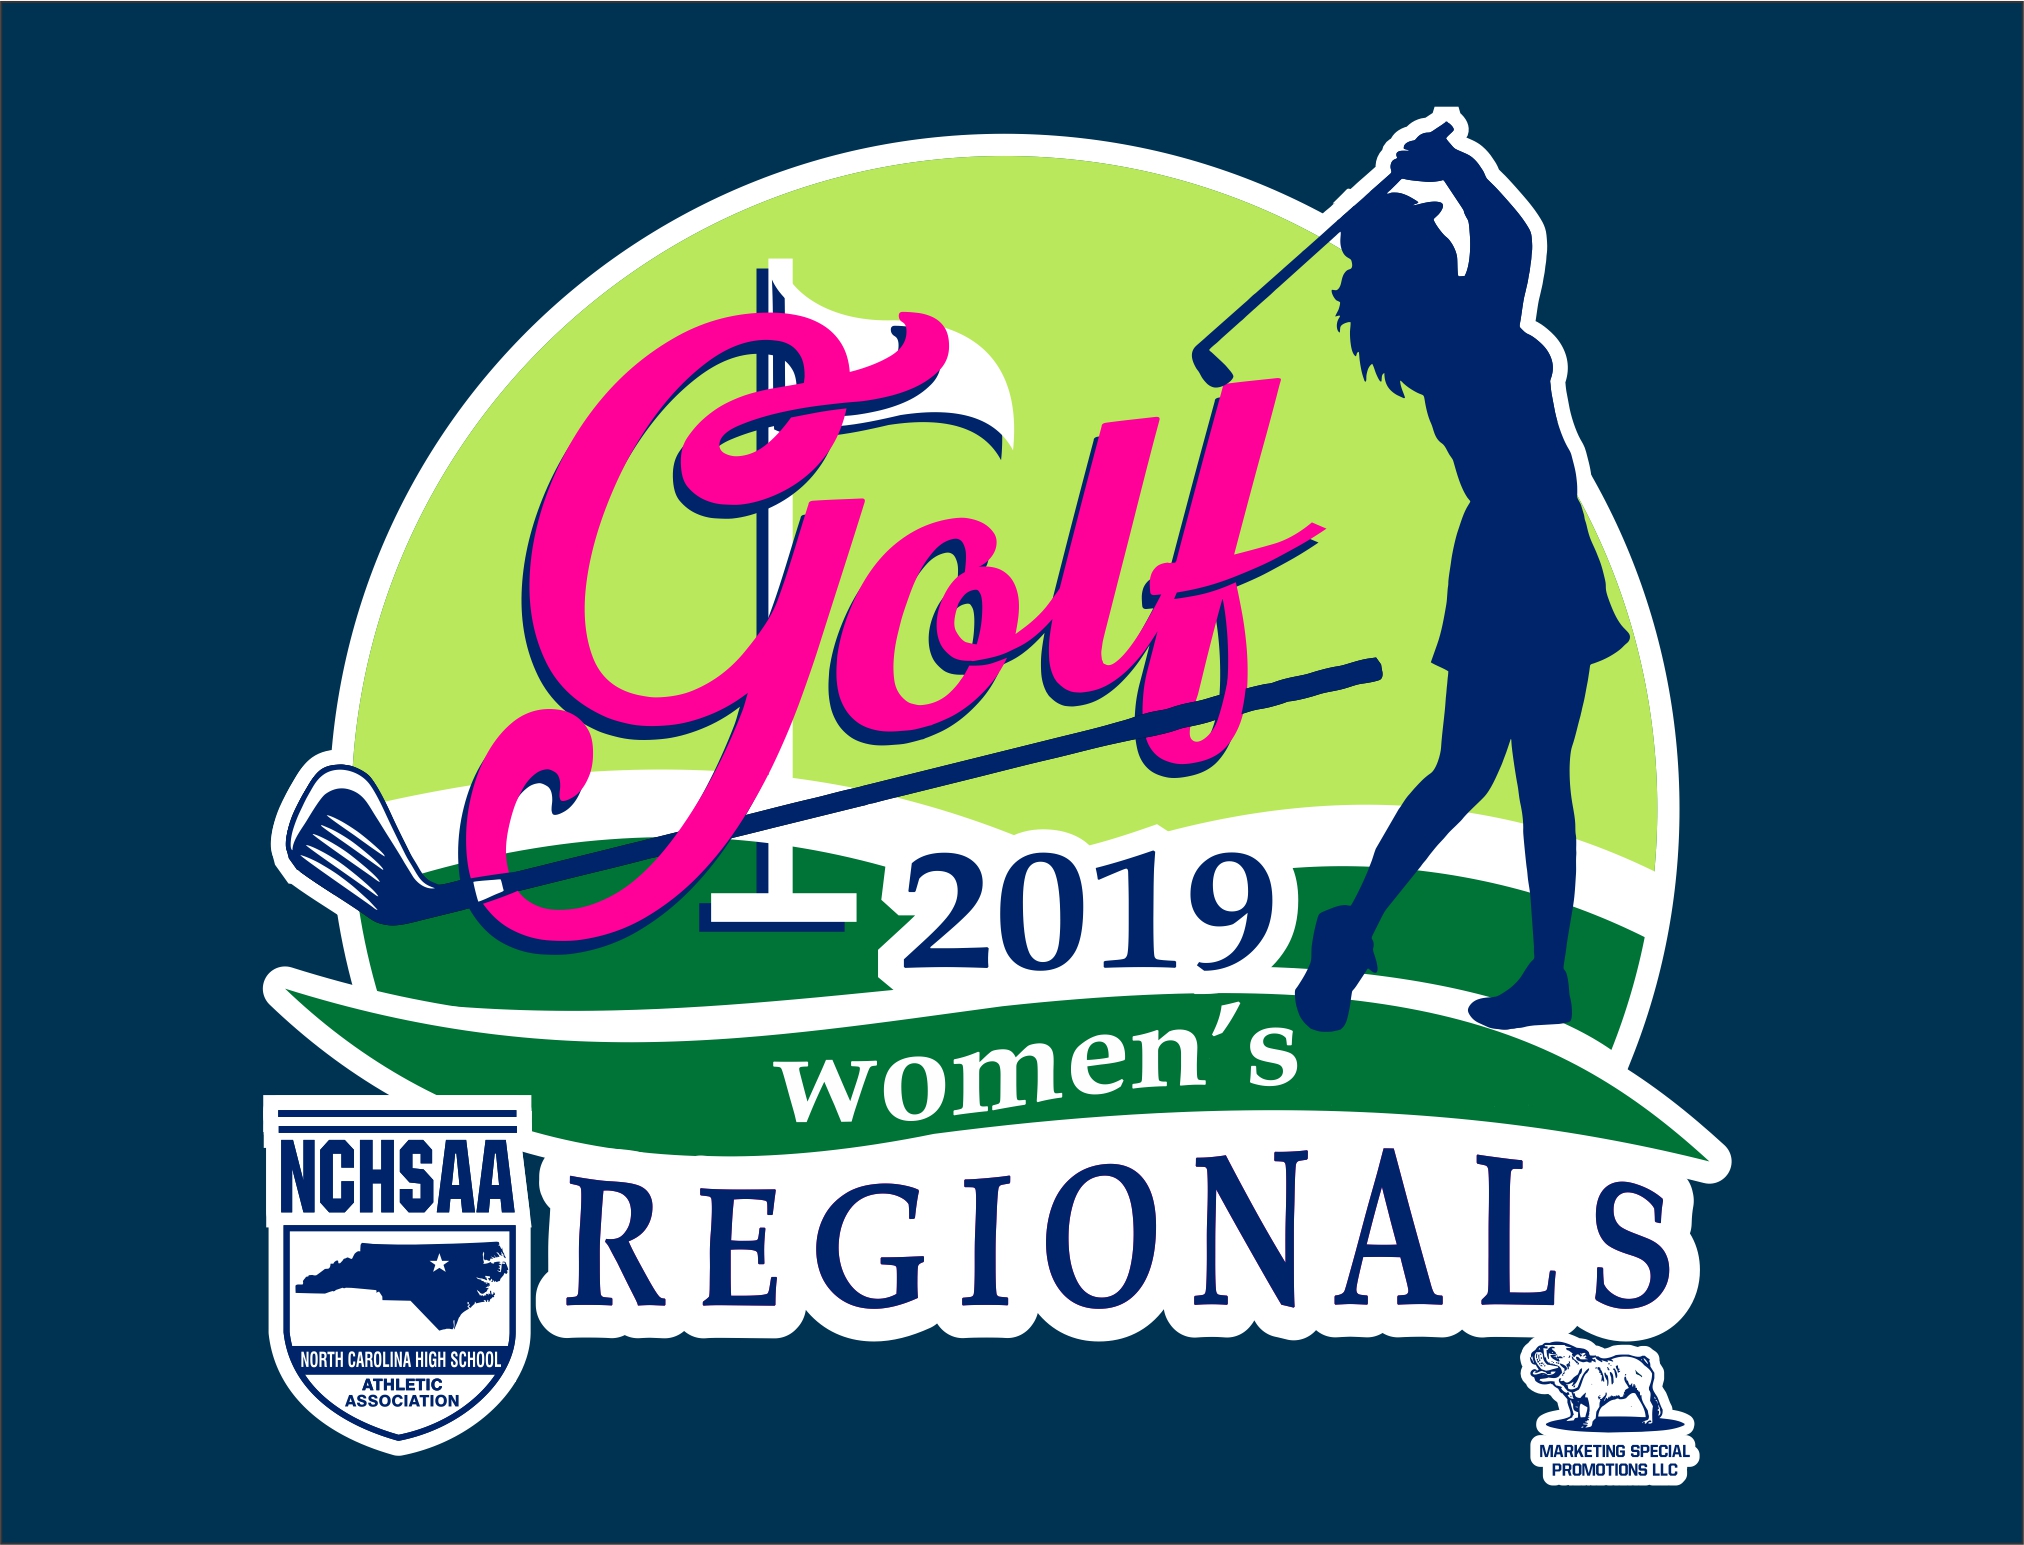 NCHSAA Golf Regionals Archives Marketing Special Promotions